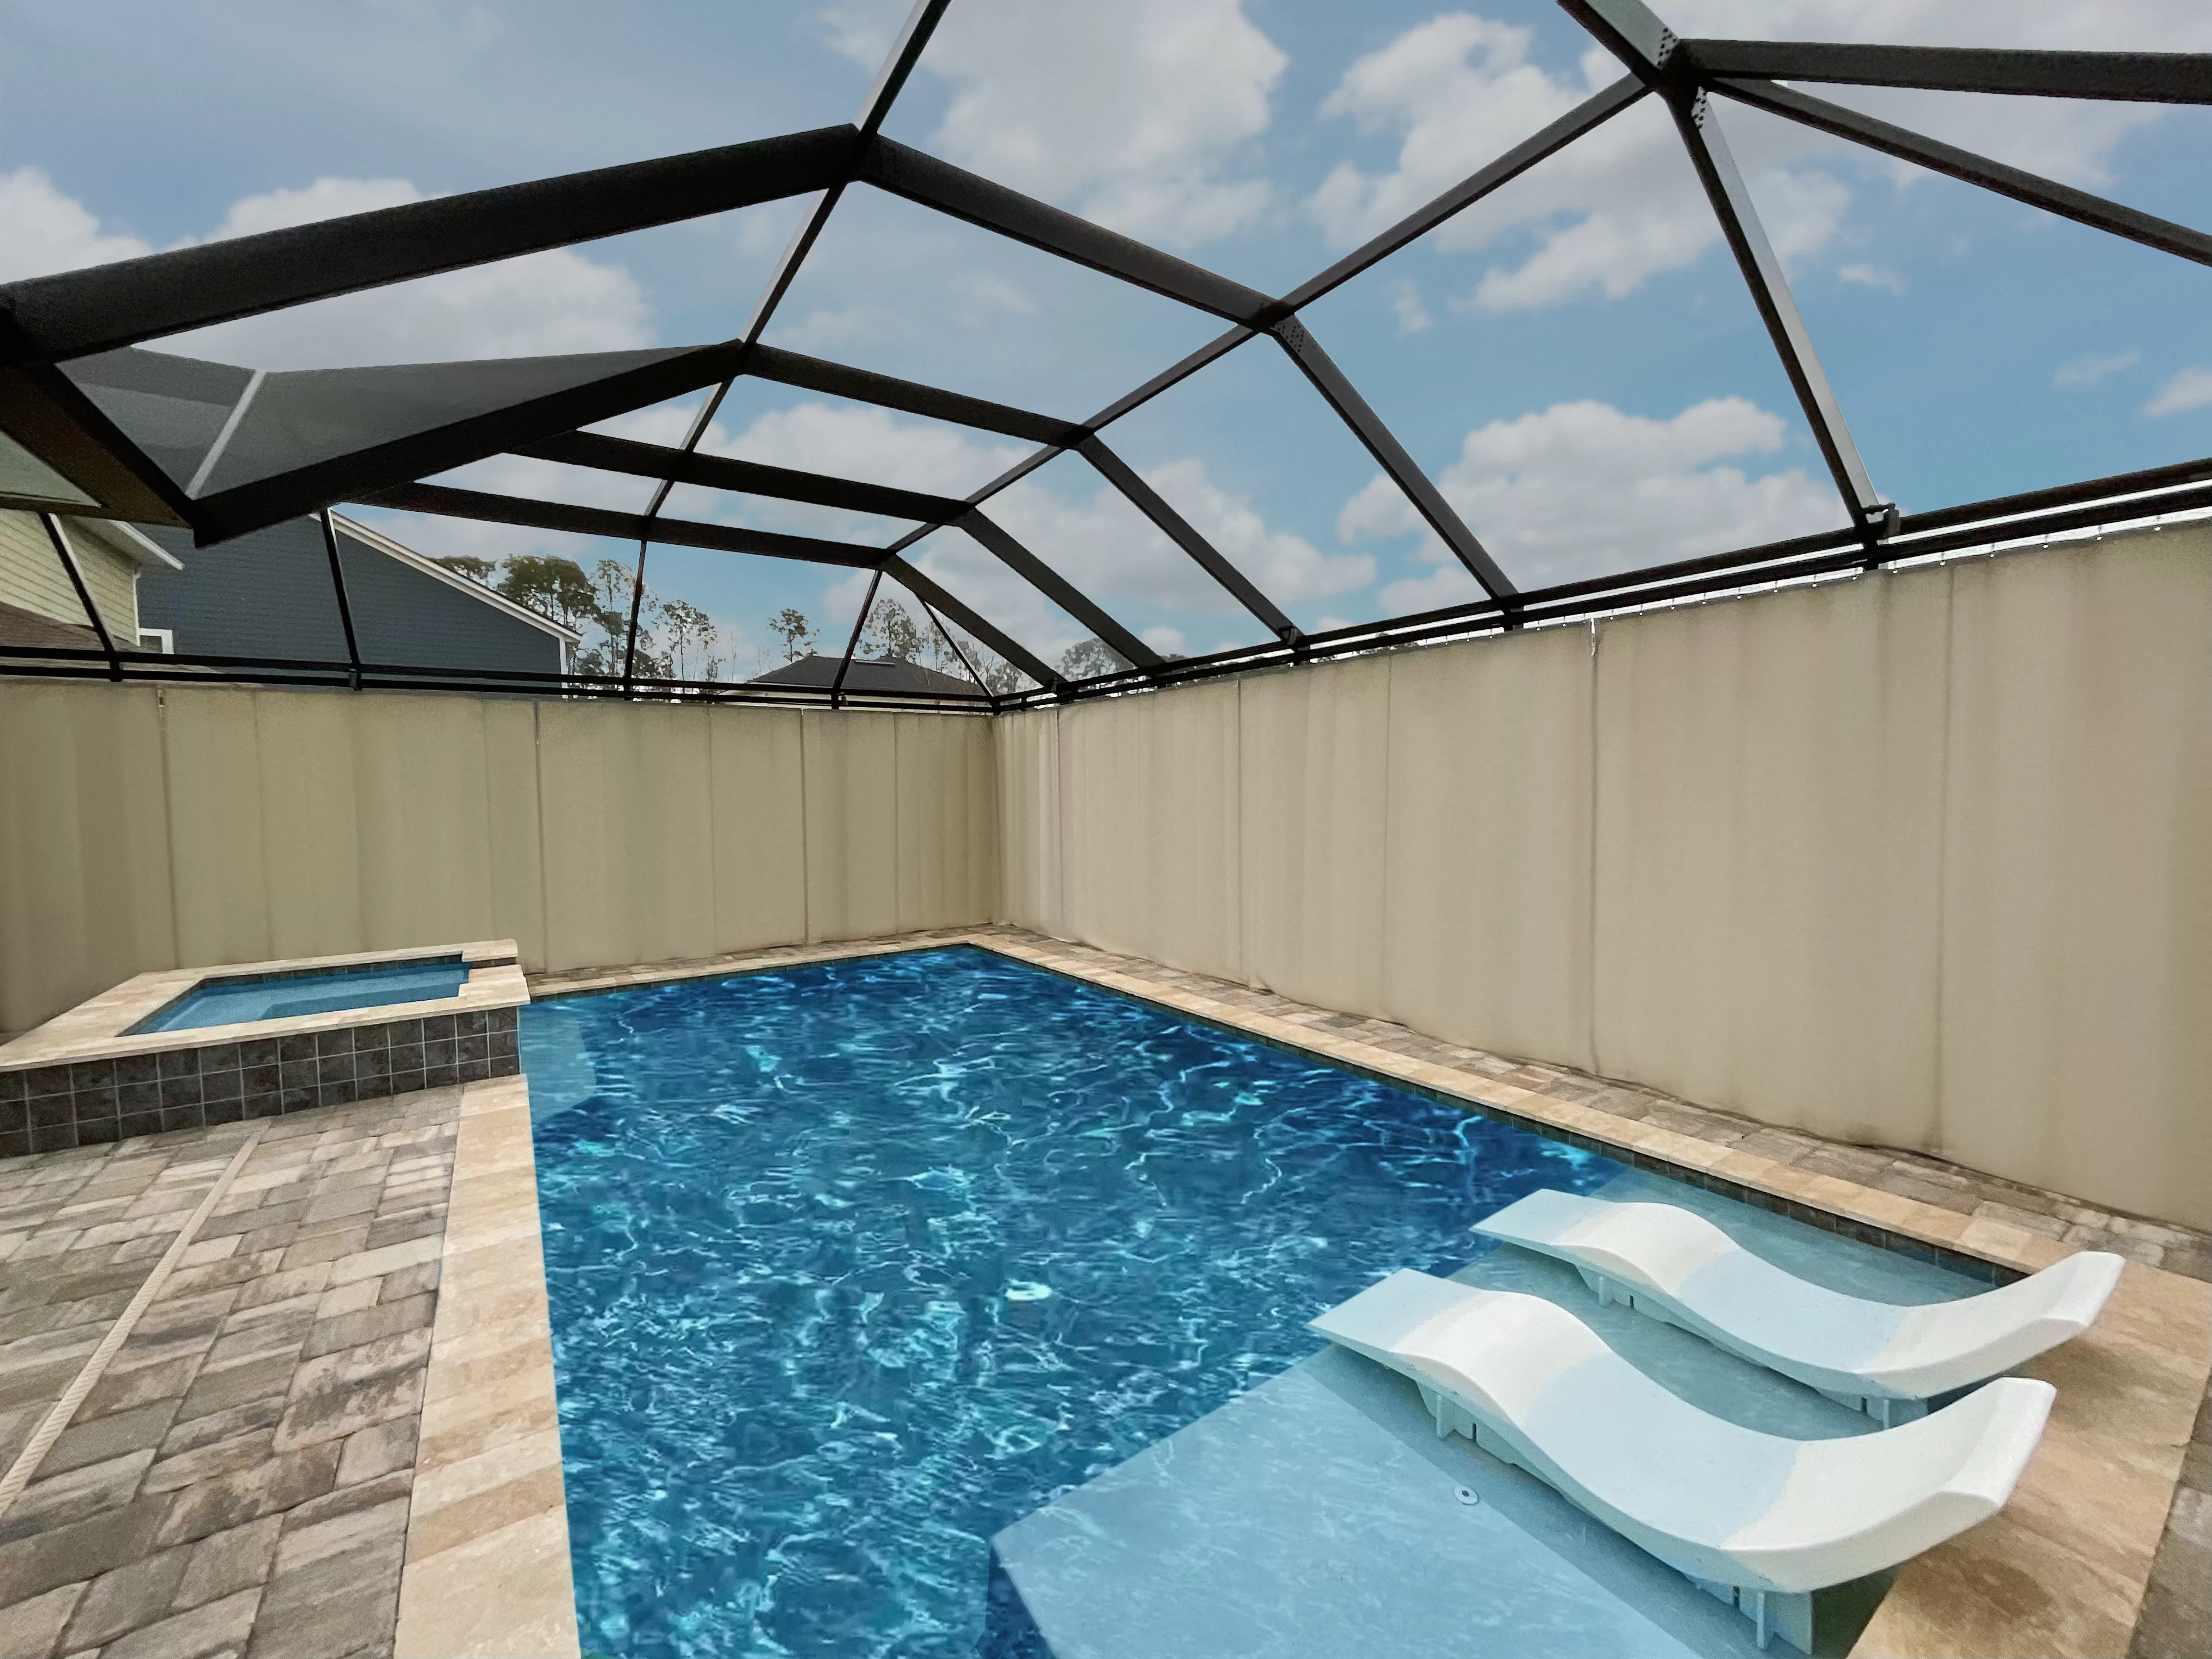 These beautiful tan-colored pool enclosure curtains are attached to the aluminum structure of the pool cage and can be opened or closed as needed.